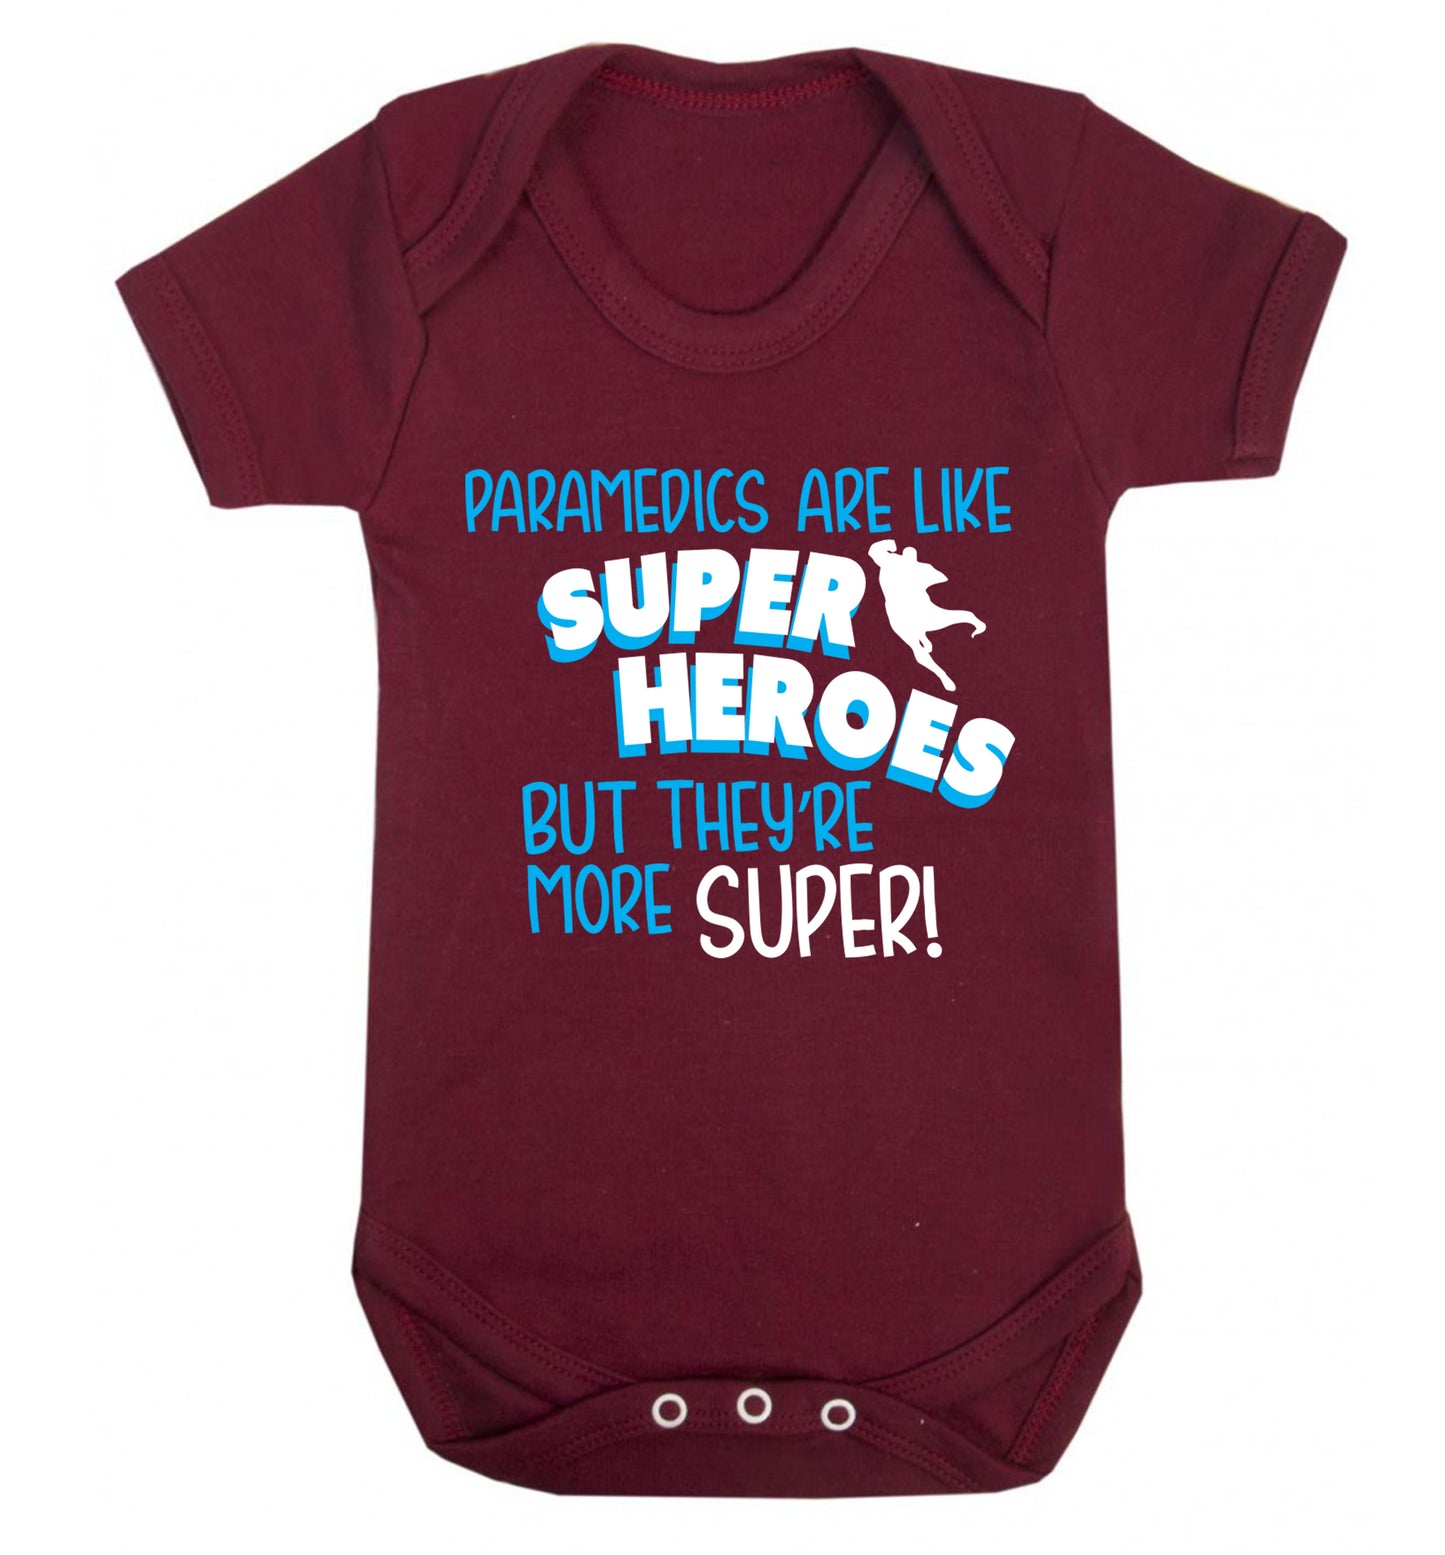 Paramedics are like superheros but they're more super Baby Vest maroon 18-24 months